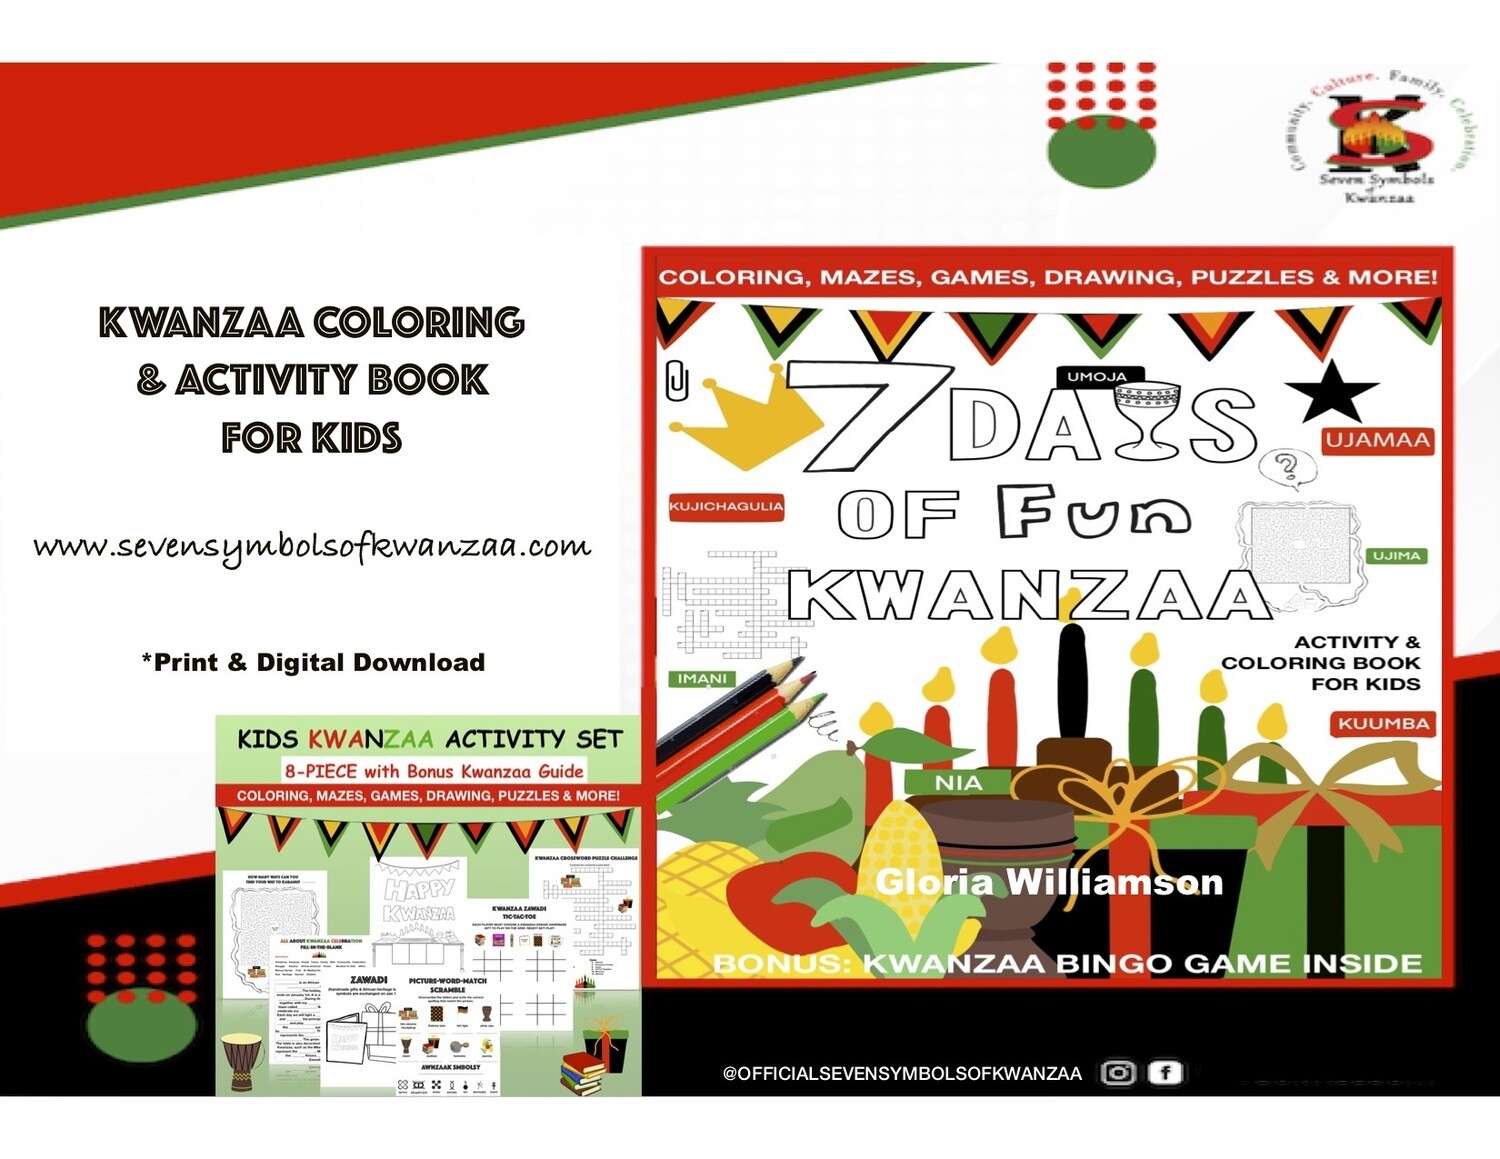 7 Days of Fun: Kwanzaa Kids Activity and Coloring Book for Kids"-PaperBack +Digital Unlimited